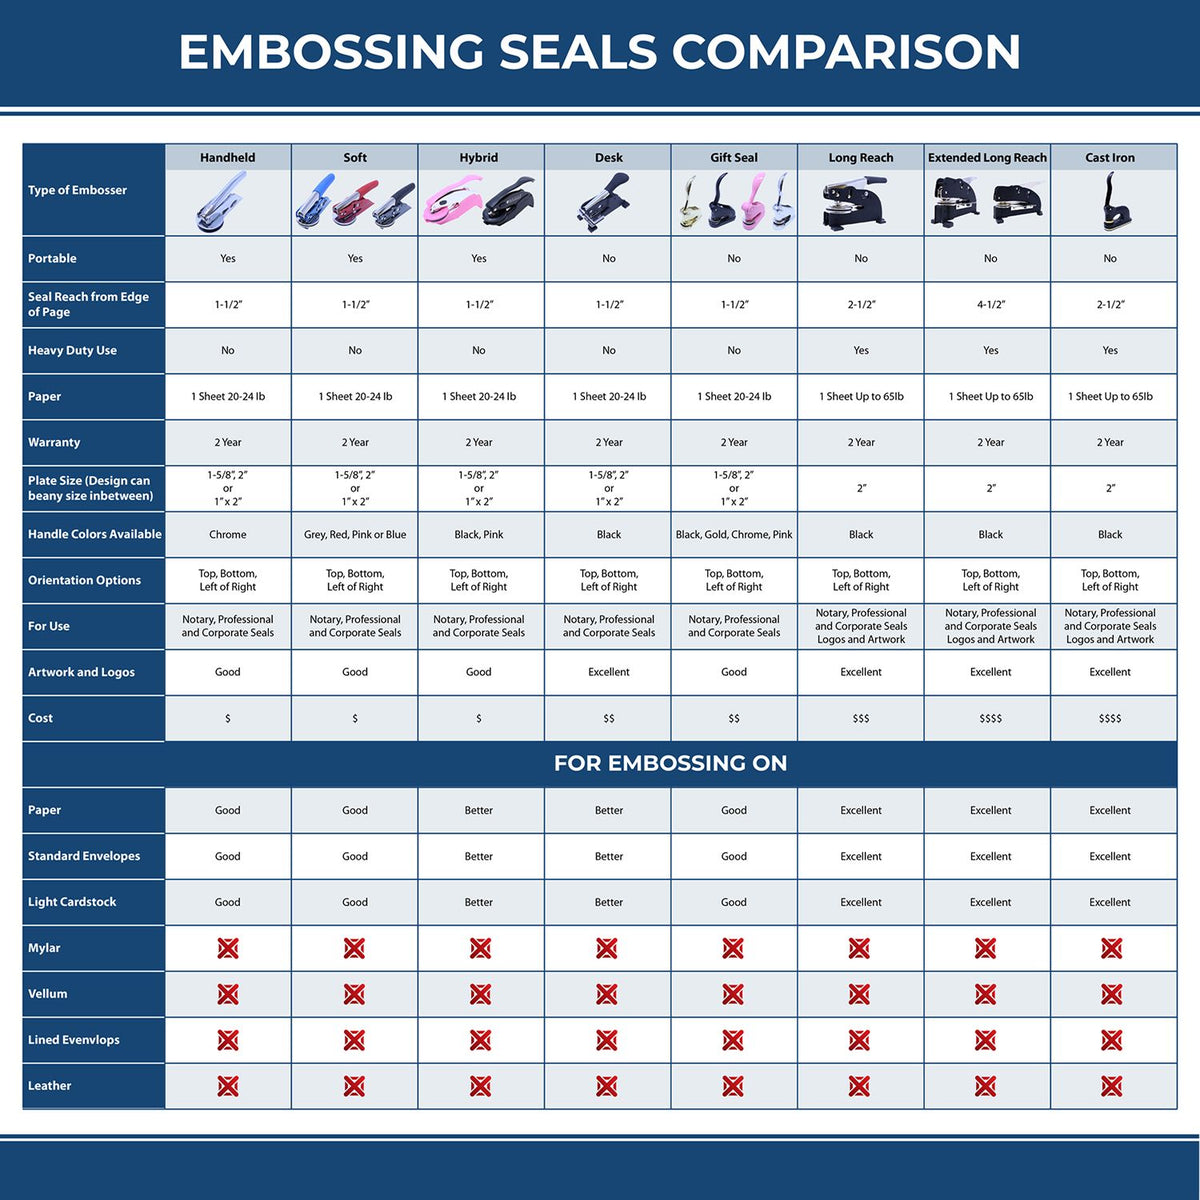 A comparison chart for the different types of mount models available for the Handheld Wisconsin Professional Geologist Embosser